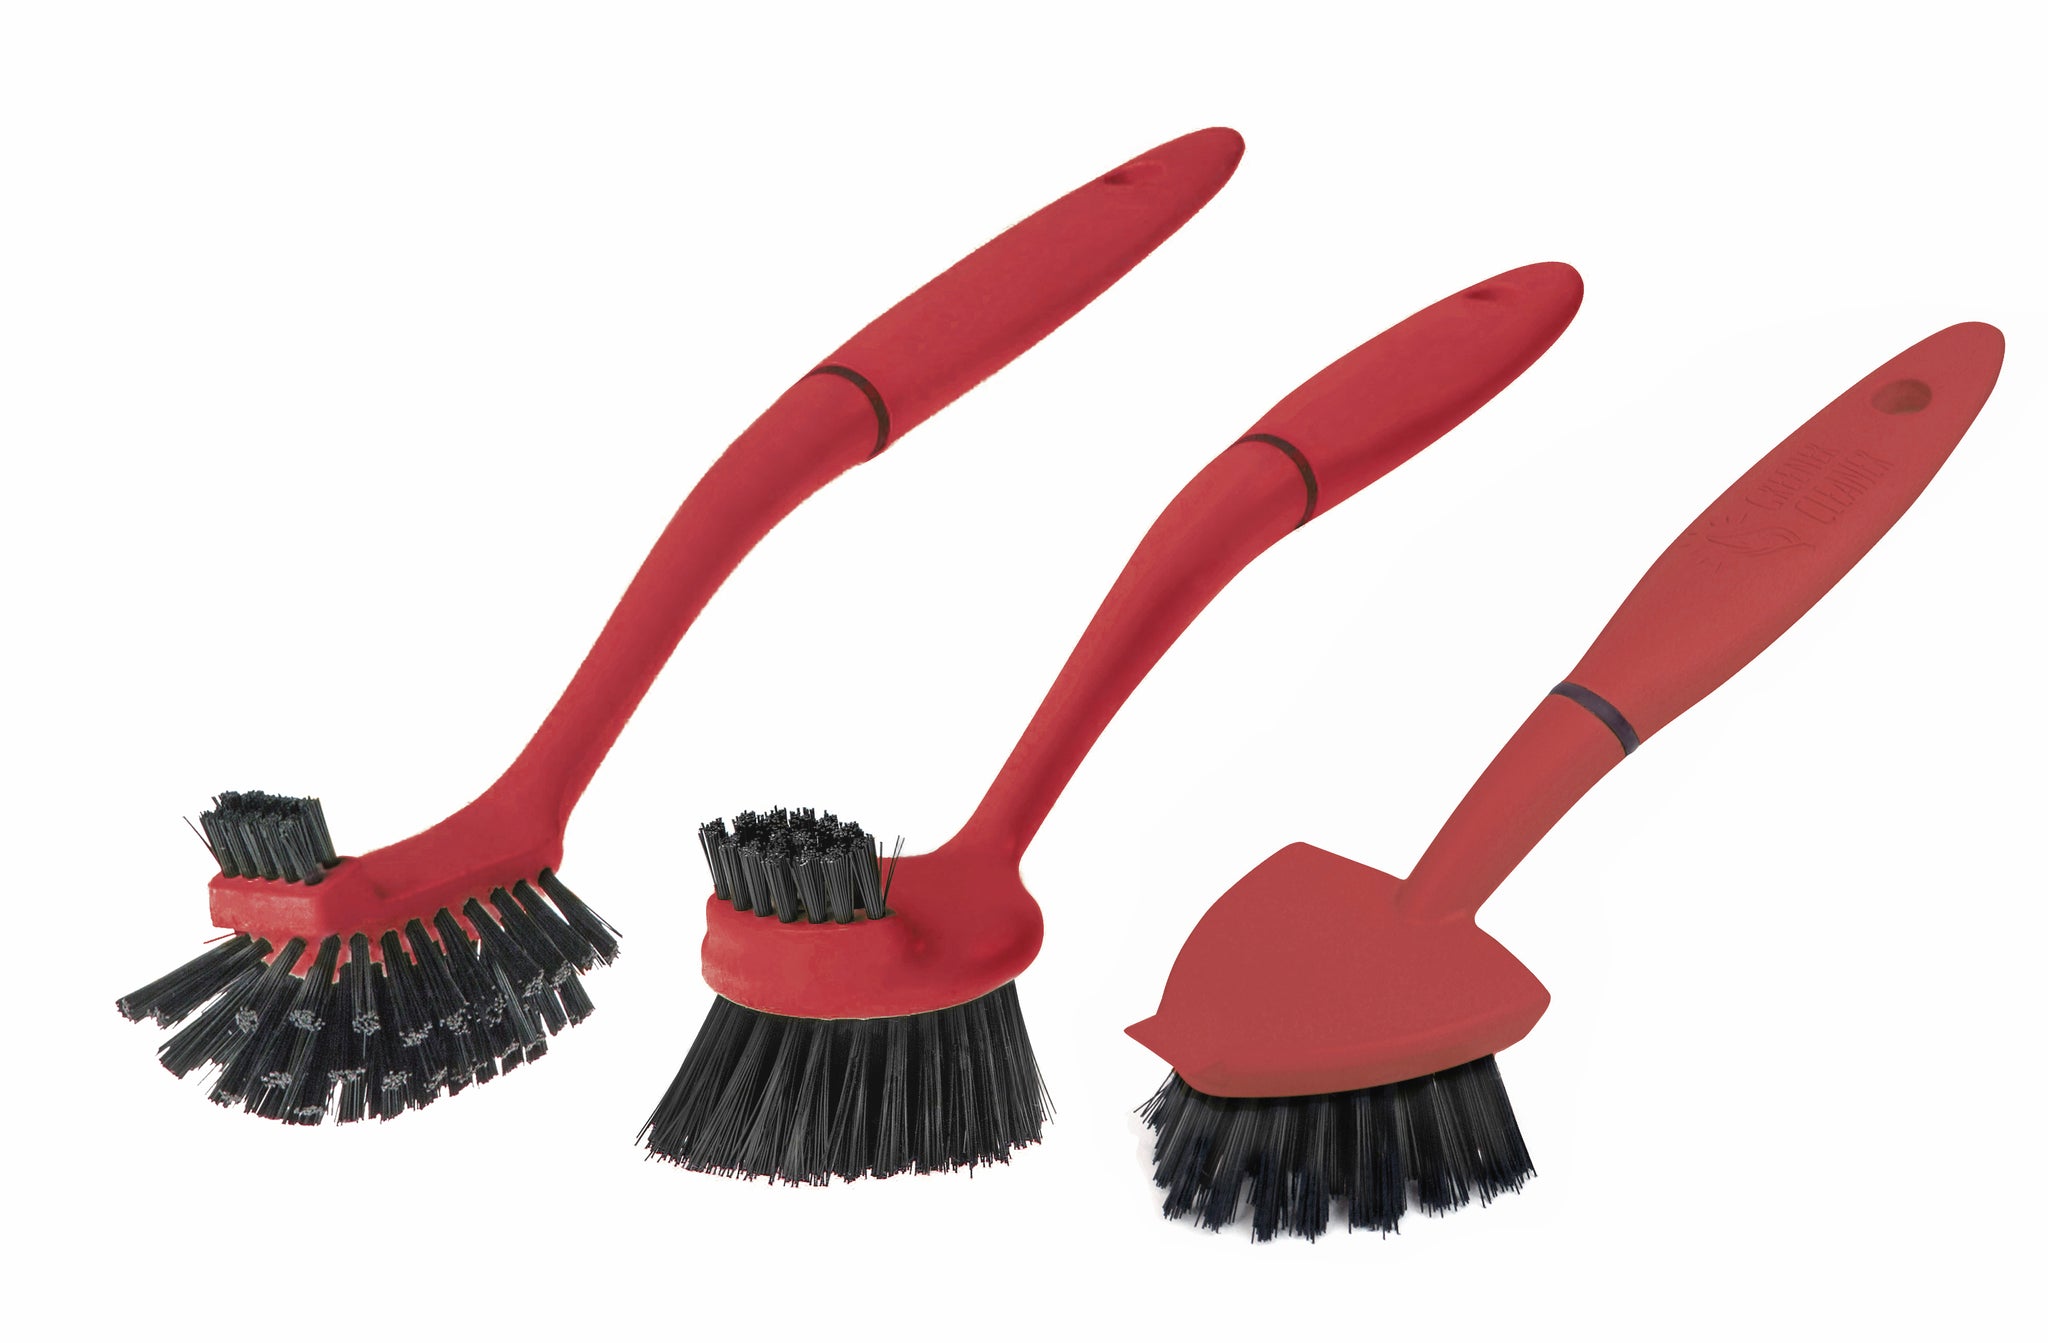 Mainstays 2-Piece Assorted Kitchen Sink Brush Set with Scrapers, Red/Teal